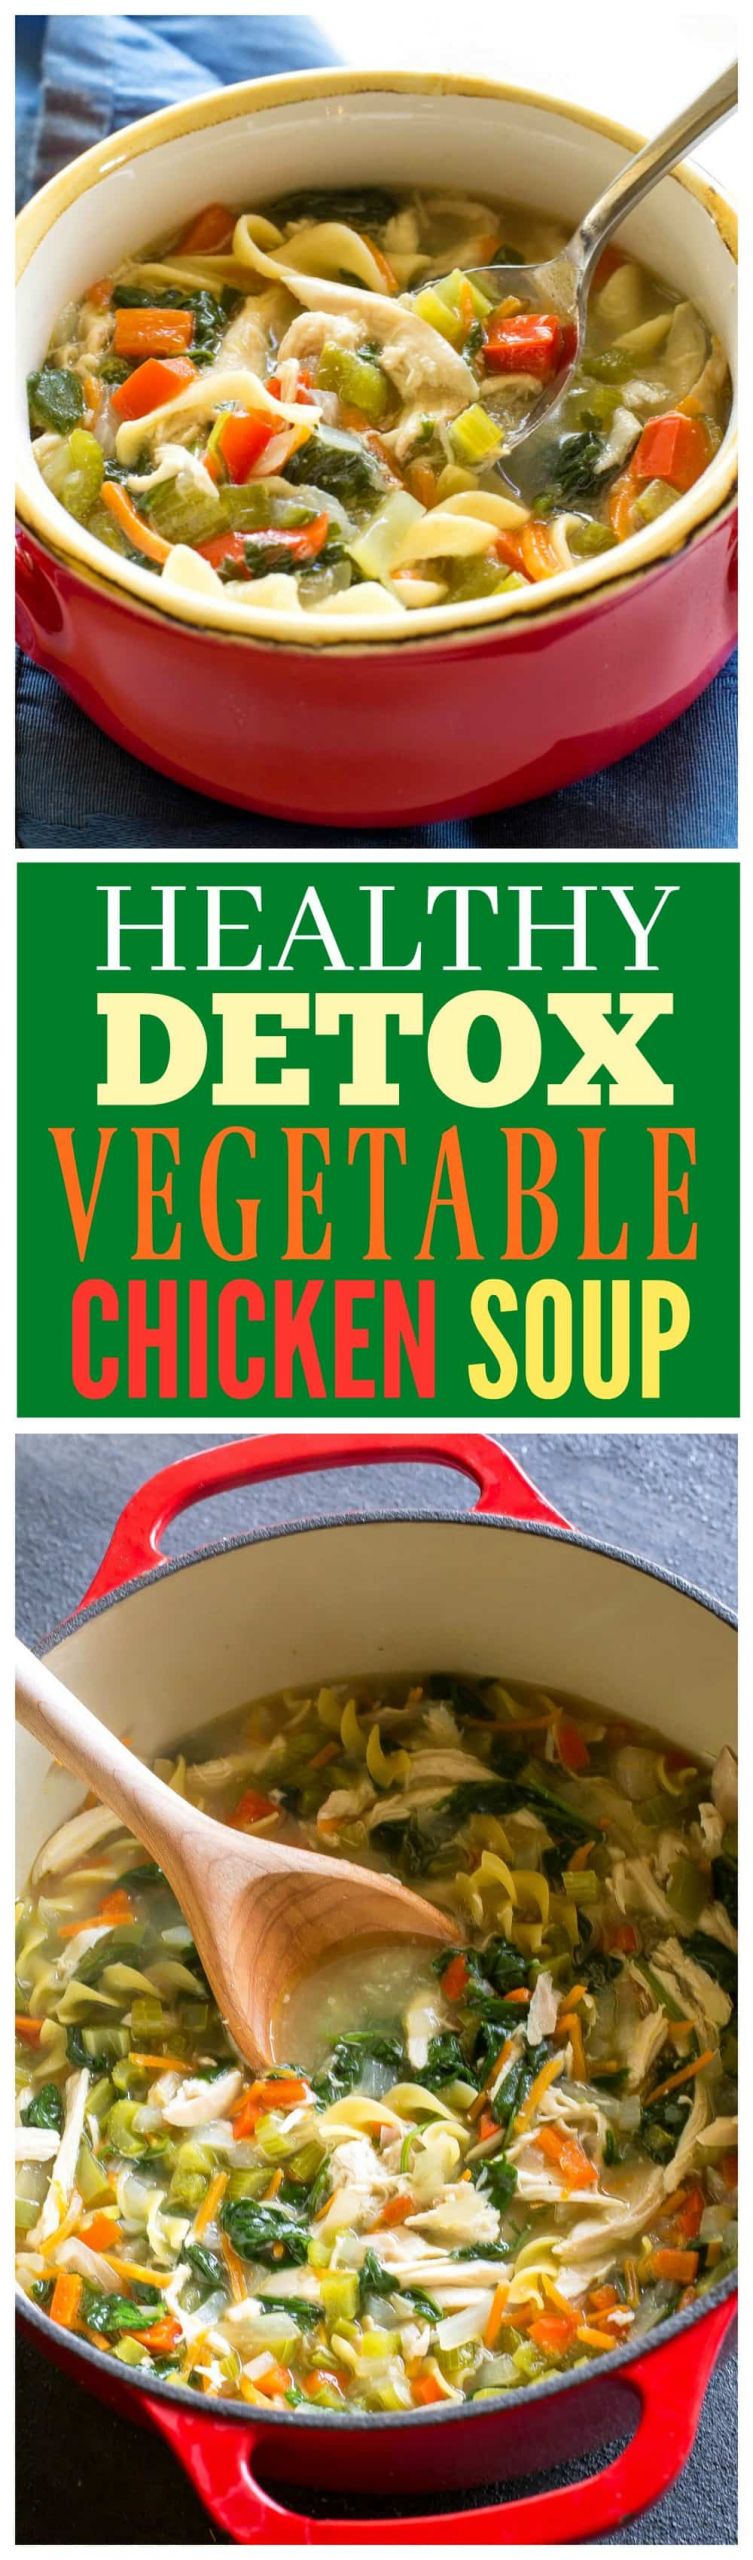 Healthy Chicken Soup Recipes
 Healthy Ve able Chicken Soup The Girl Who Ate Everything